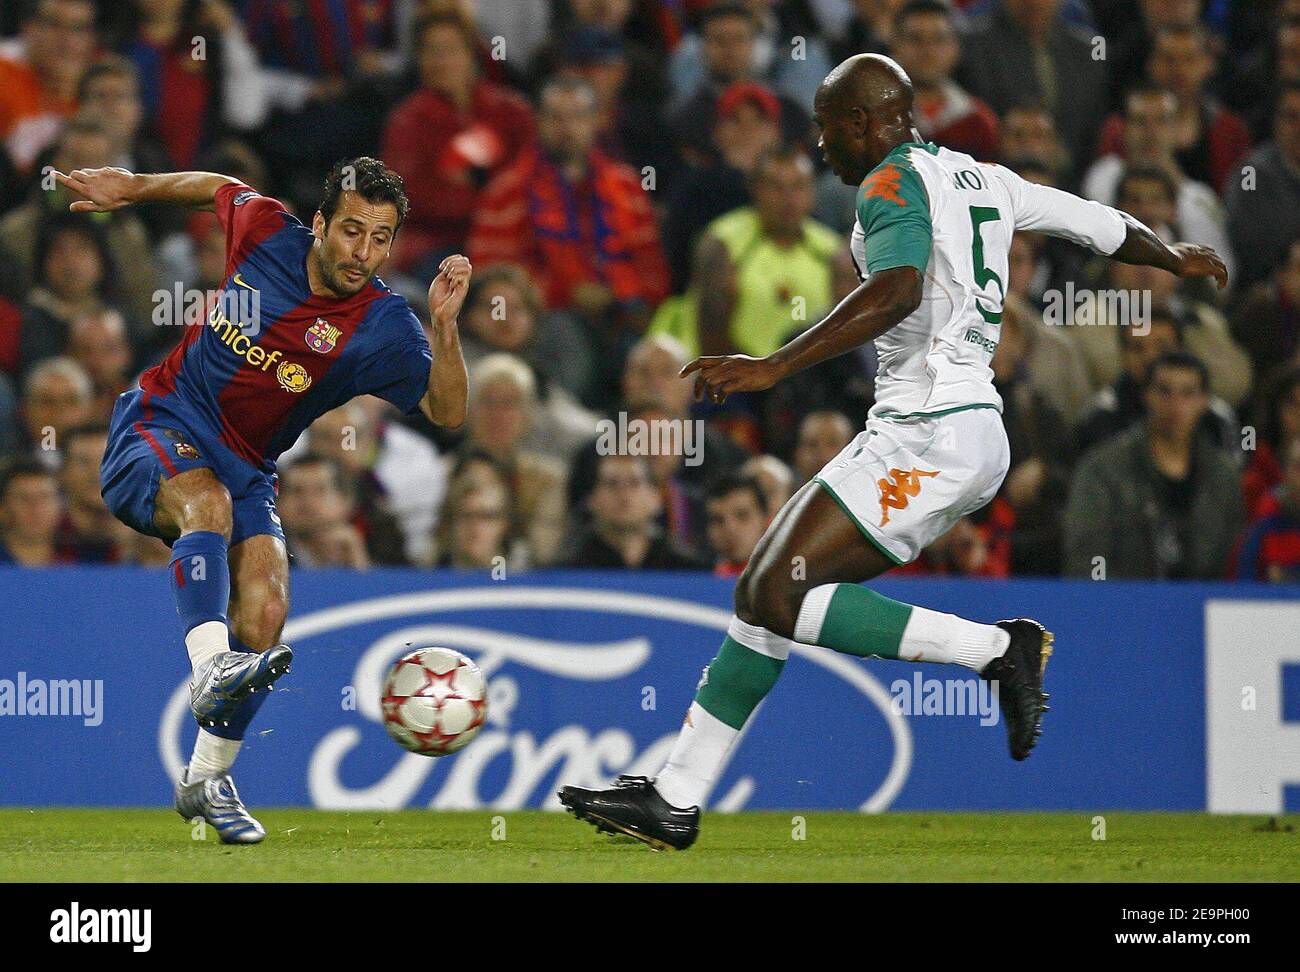 Barcelona's Ludovic Giuly and Werder Bremen's Pierre Wome battle for the  ball during the UEFA Champions League, Group A, FC Barcelona vs Werder  Bremen at Camp Nou, in Barcelona, Spain, on December